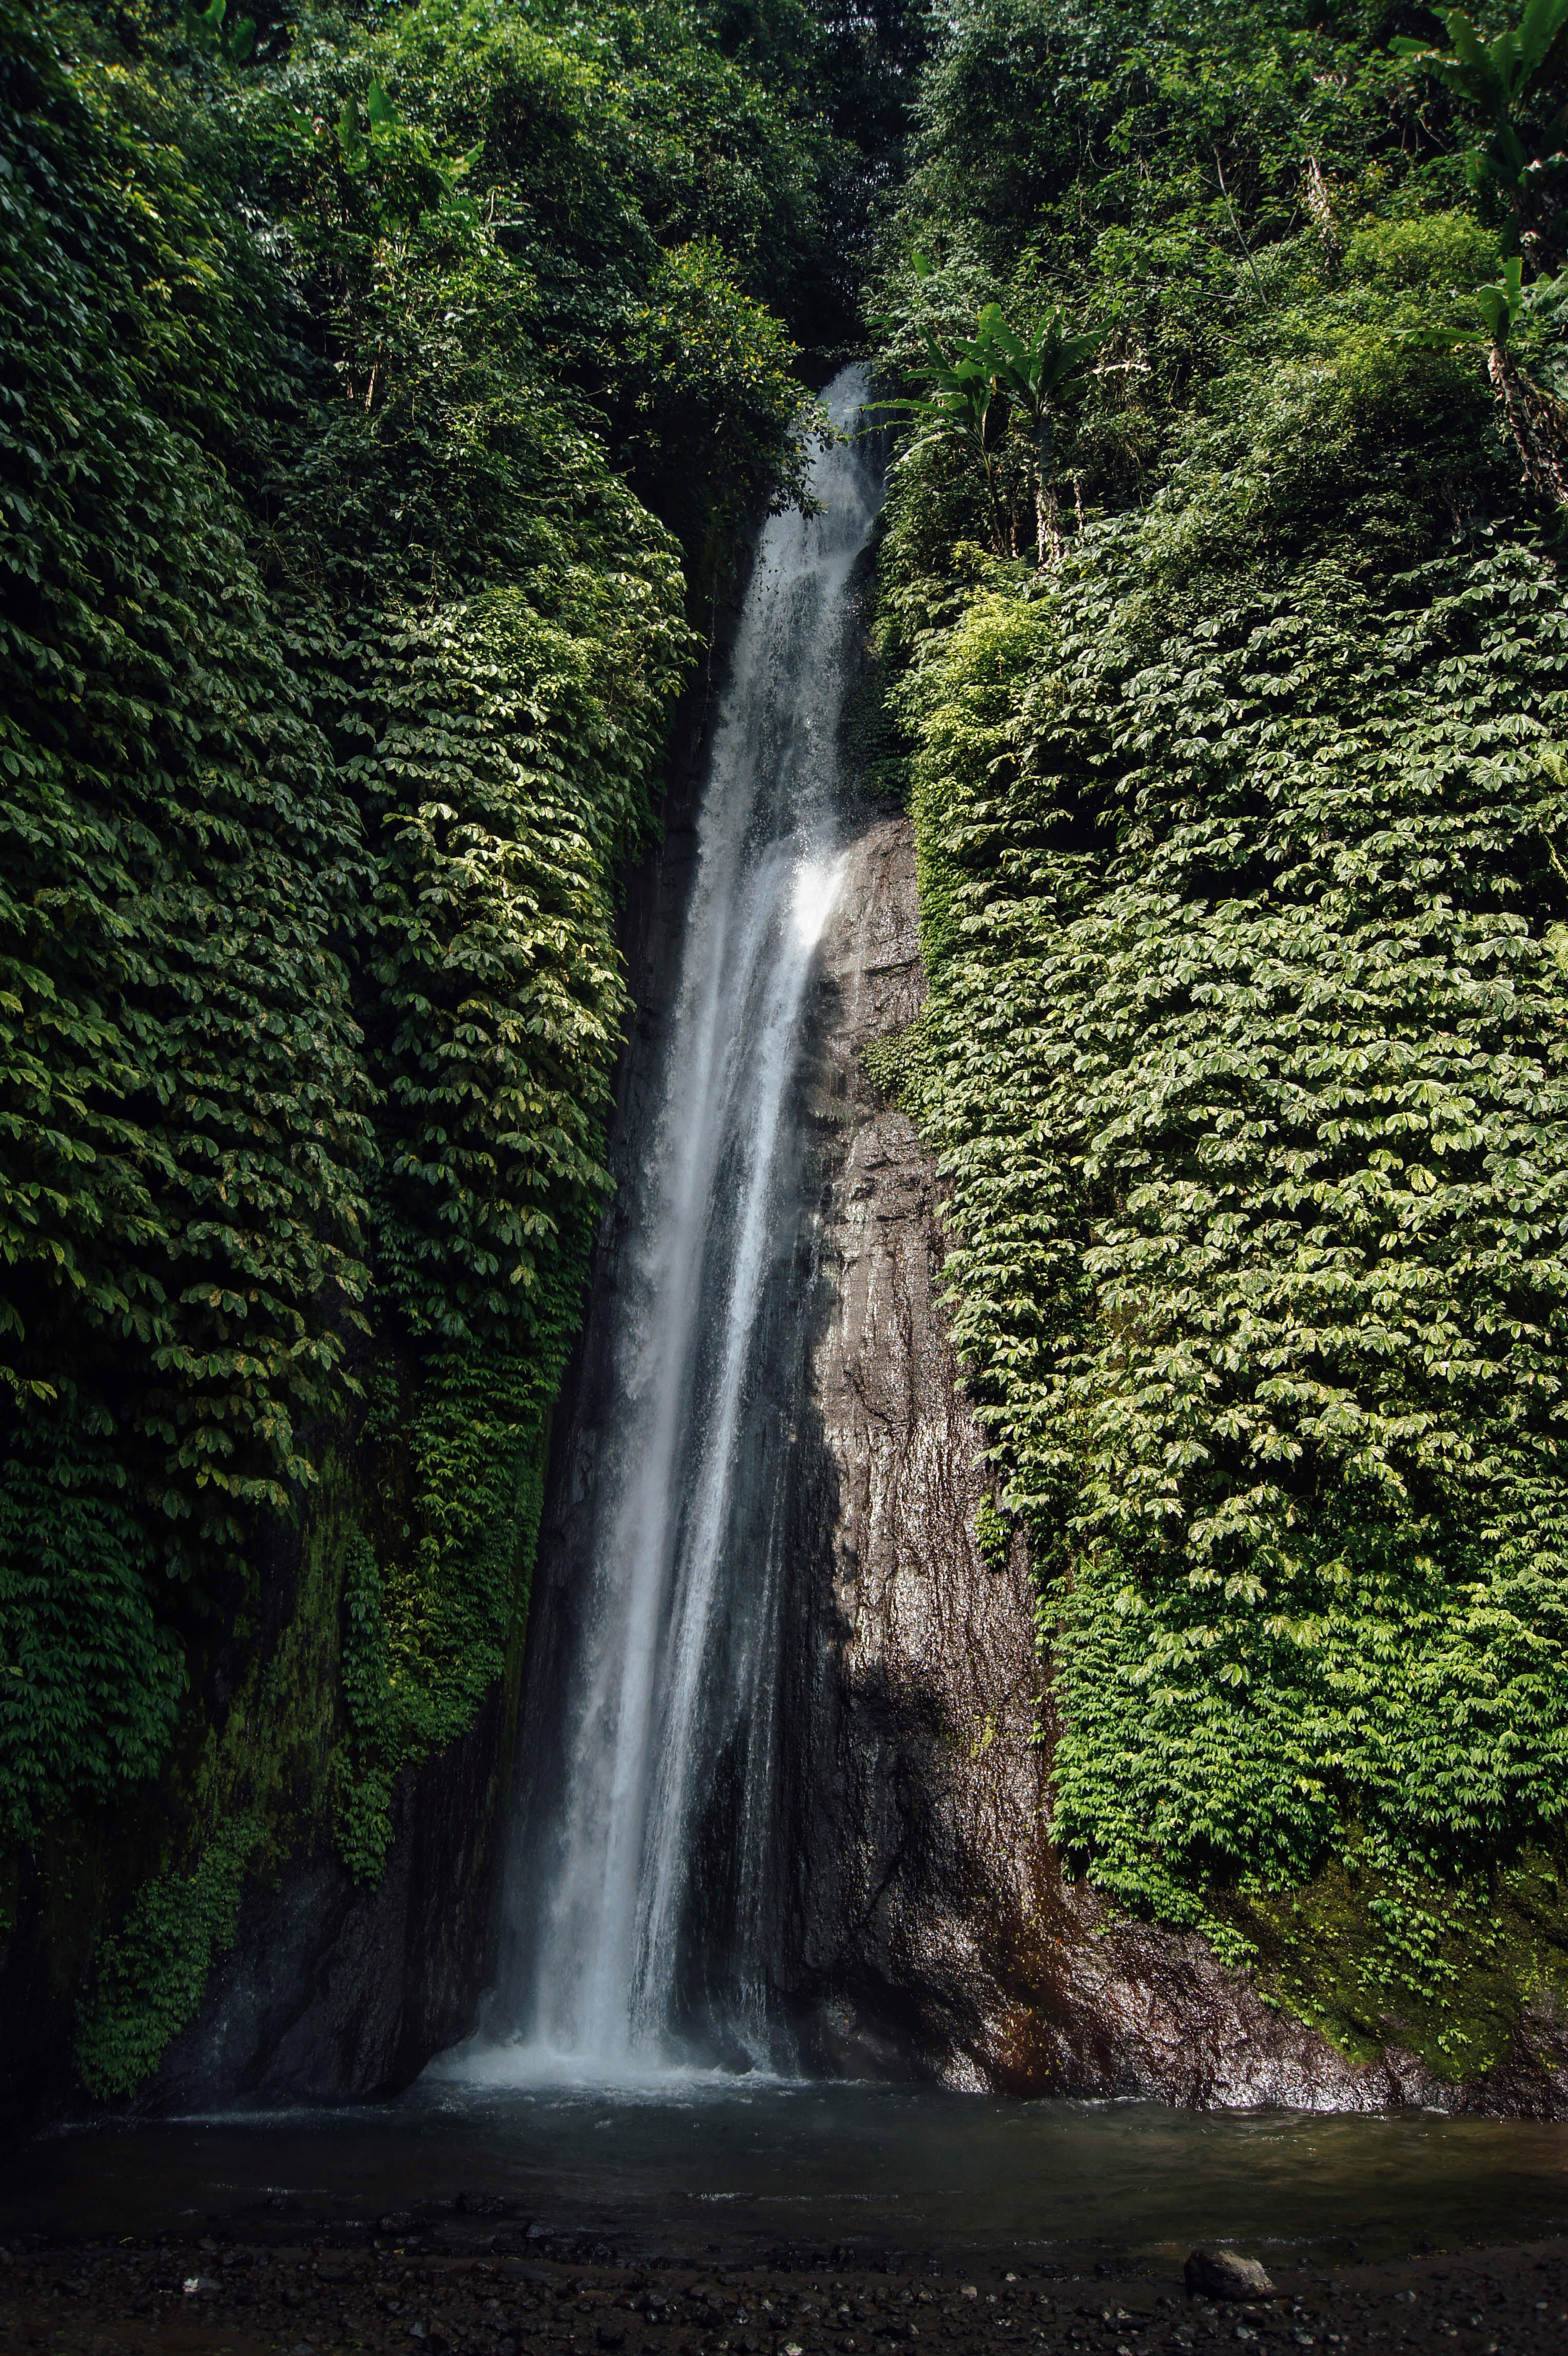 Waterfalls in Nature in Indonesia image - Free stock photo - Public ...